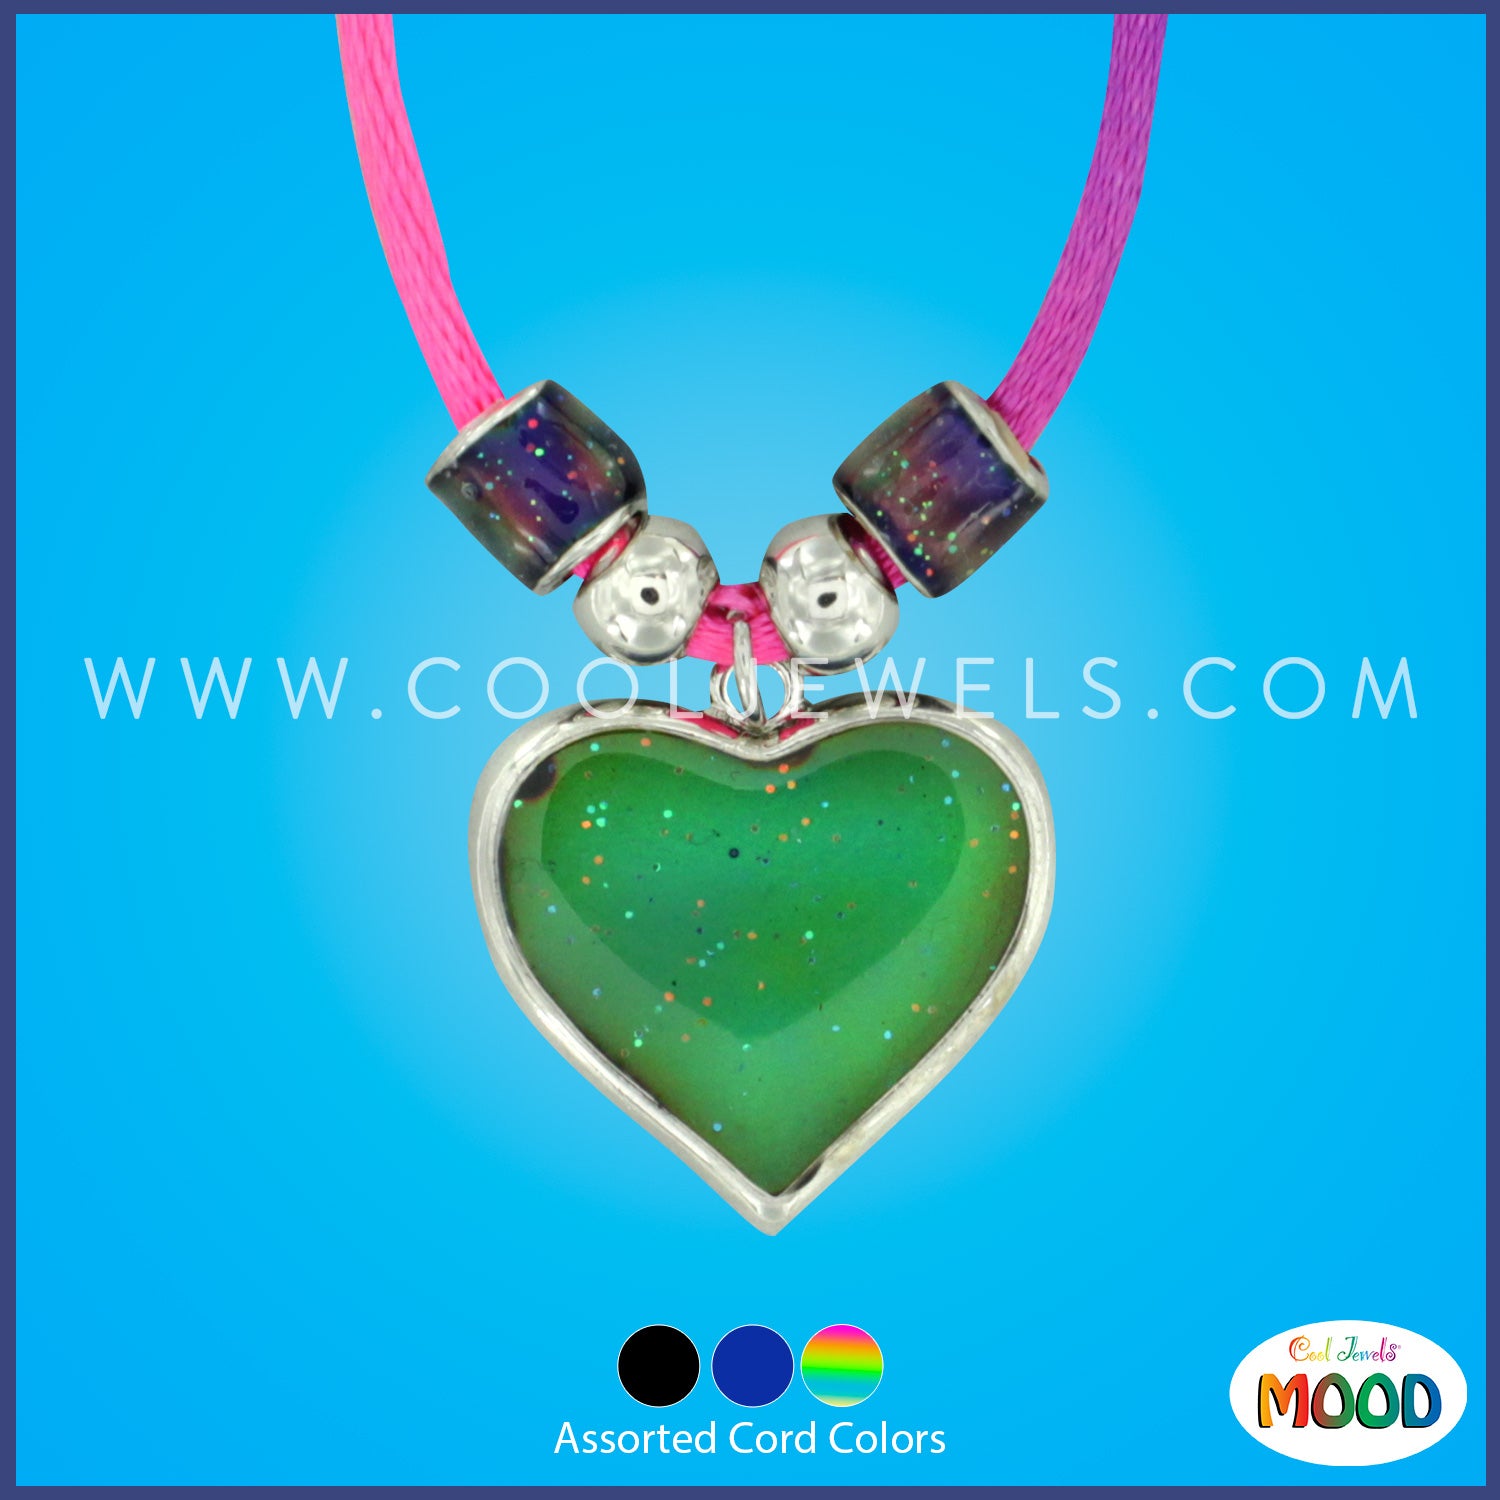 CORD NECKLACE WITH MOOD HEART PENDANT CARDED - ASSORTED